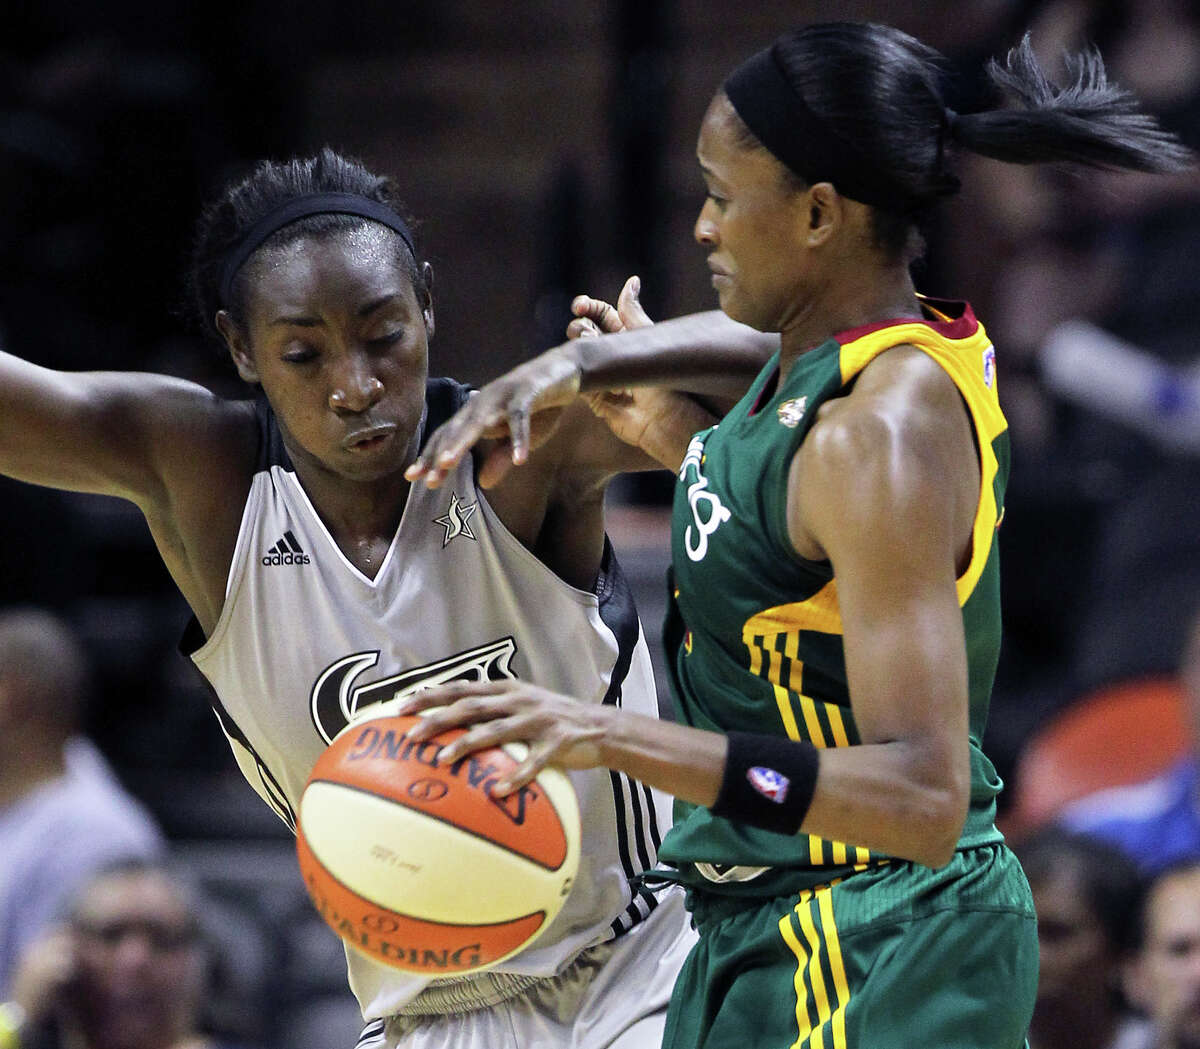 San Antonio's Sophia Young takes a shot at a steal against Swin Cash as the San Antonio Silver Stars play the Seattle Storm at the AT&T Center on July 14, 2011. Tom Reel/Staff